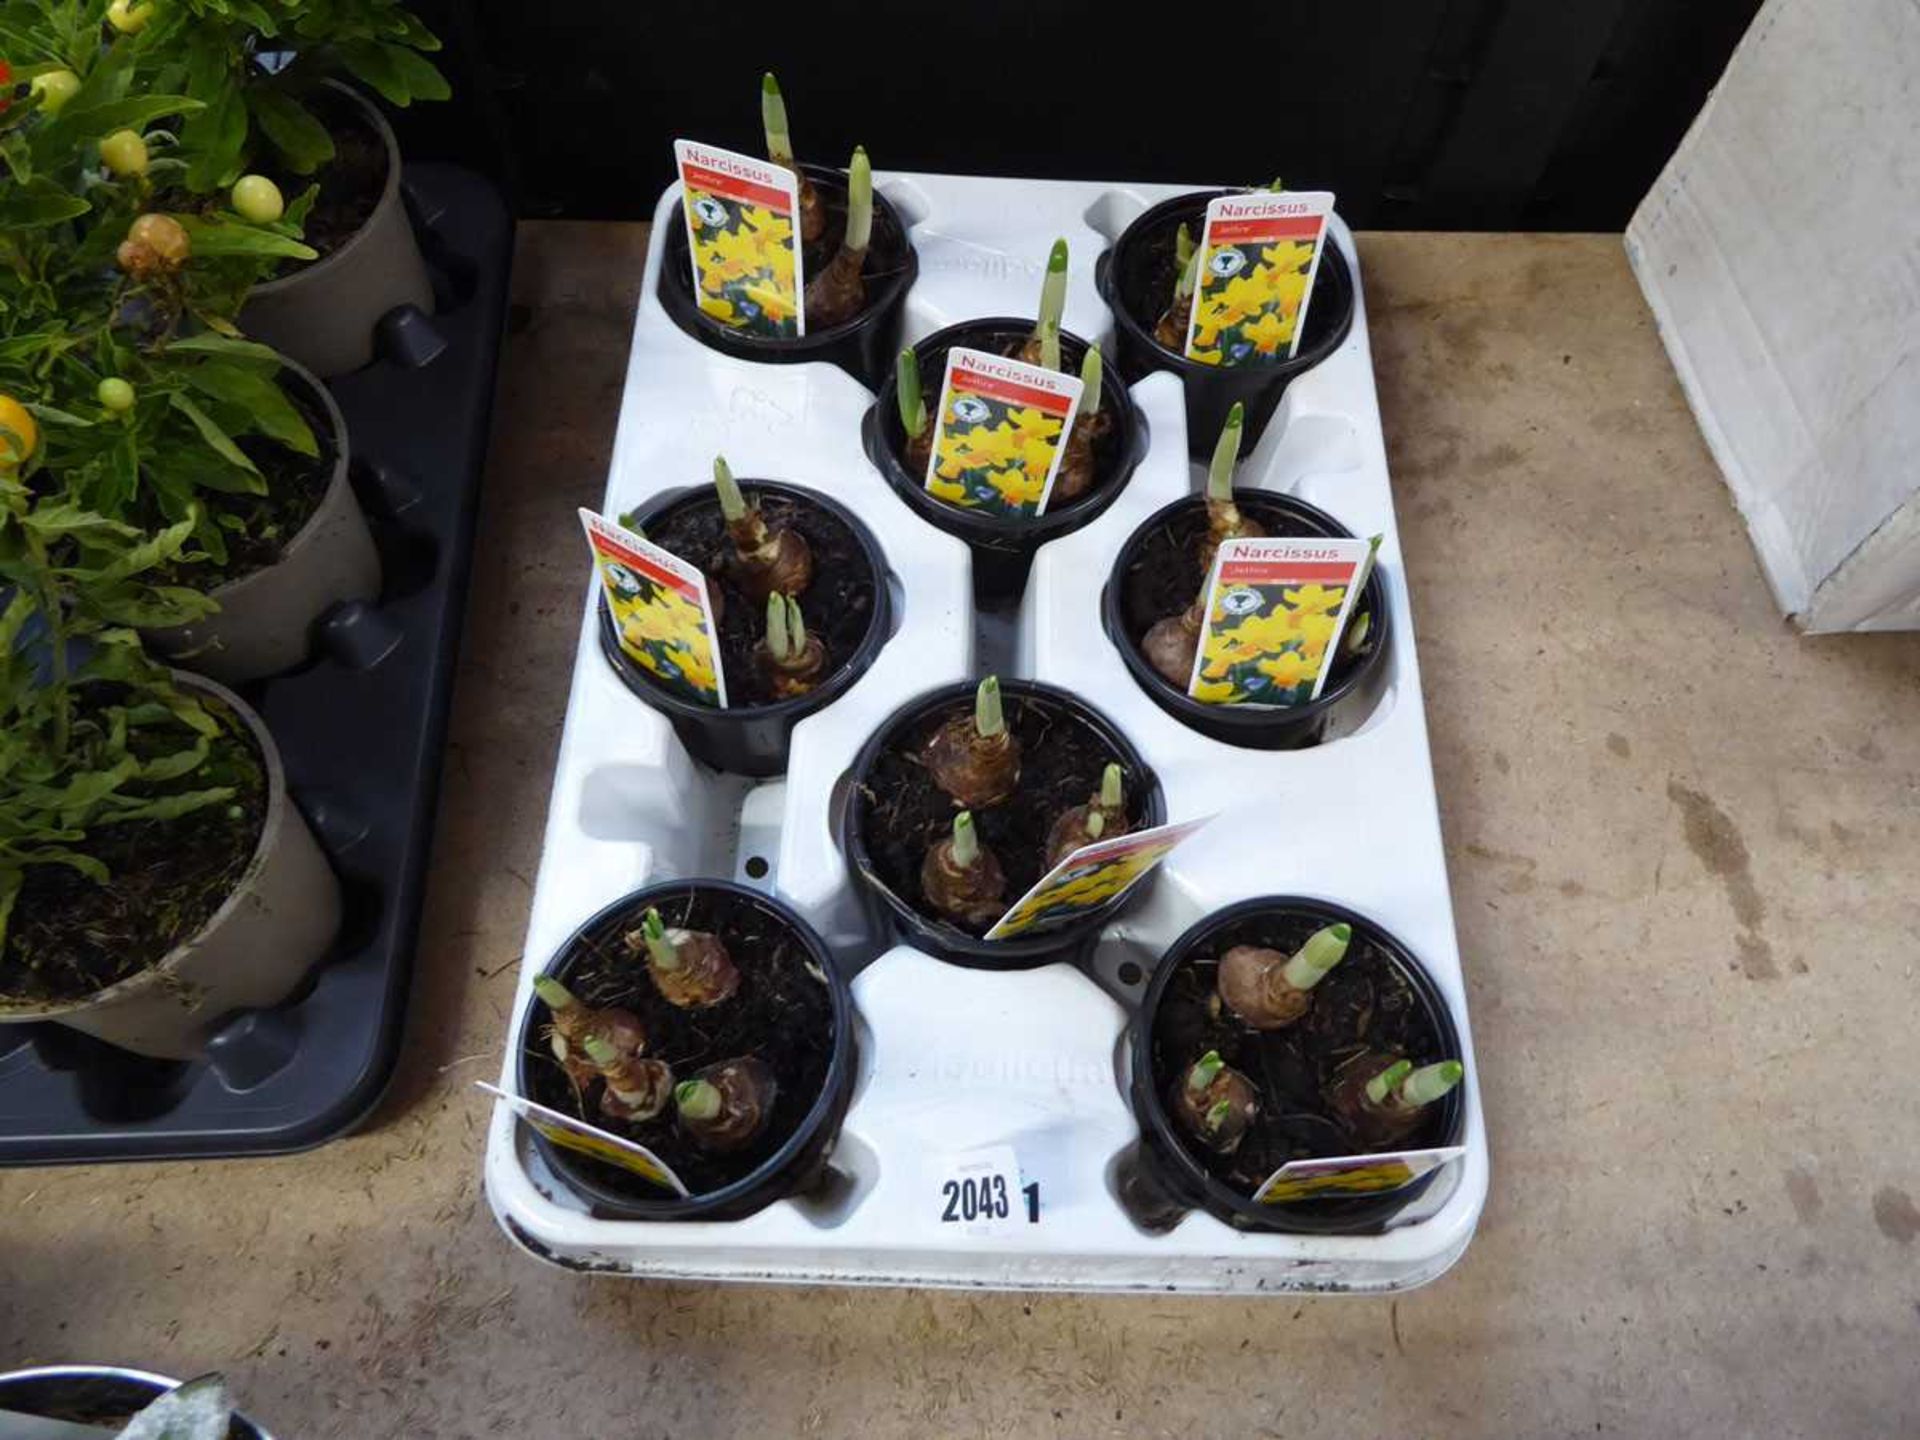 Tray containing 8 potted Jet Fire narcissus bulbs